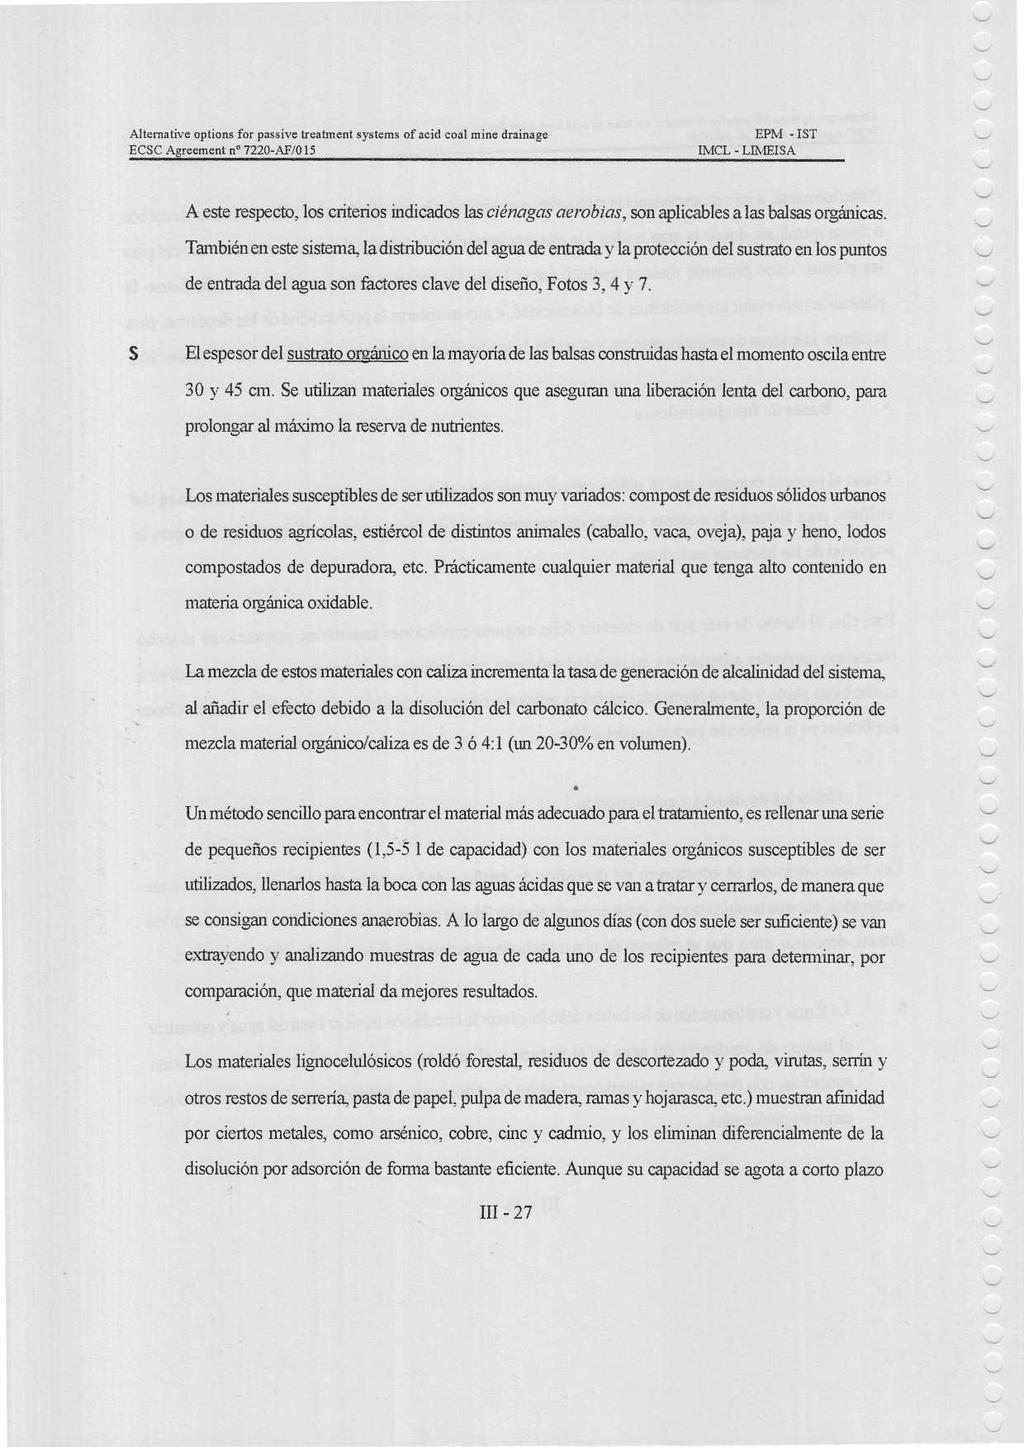 Alterna tive options for passive treatment systems of acid coal mine drainage ECSC Agreement n 7220-AF/O 15 EPM - IS T IMCL - LIMEIS A A este respecto, los criterios indicados las ciénagas aerobias,